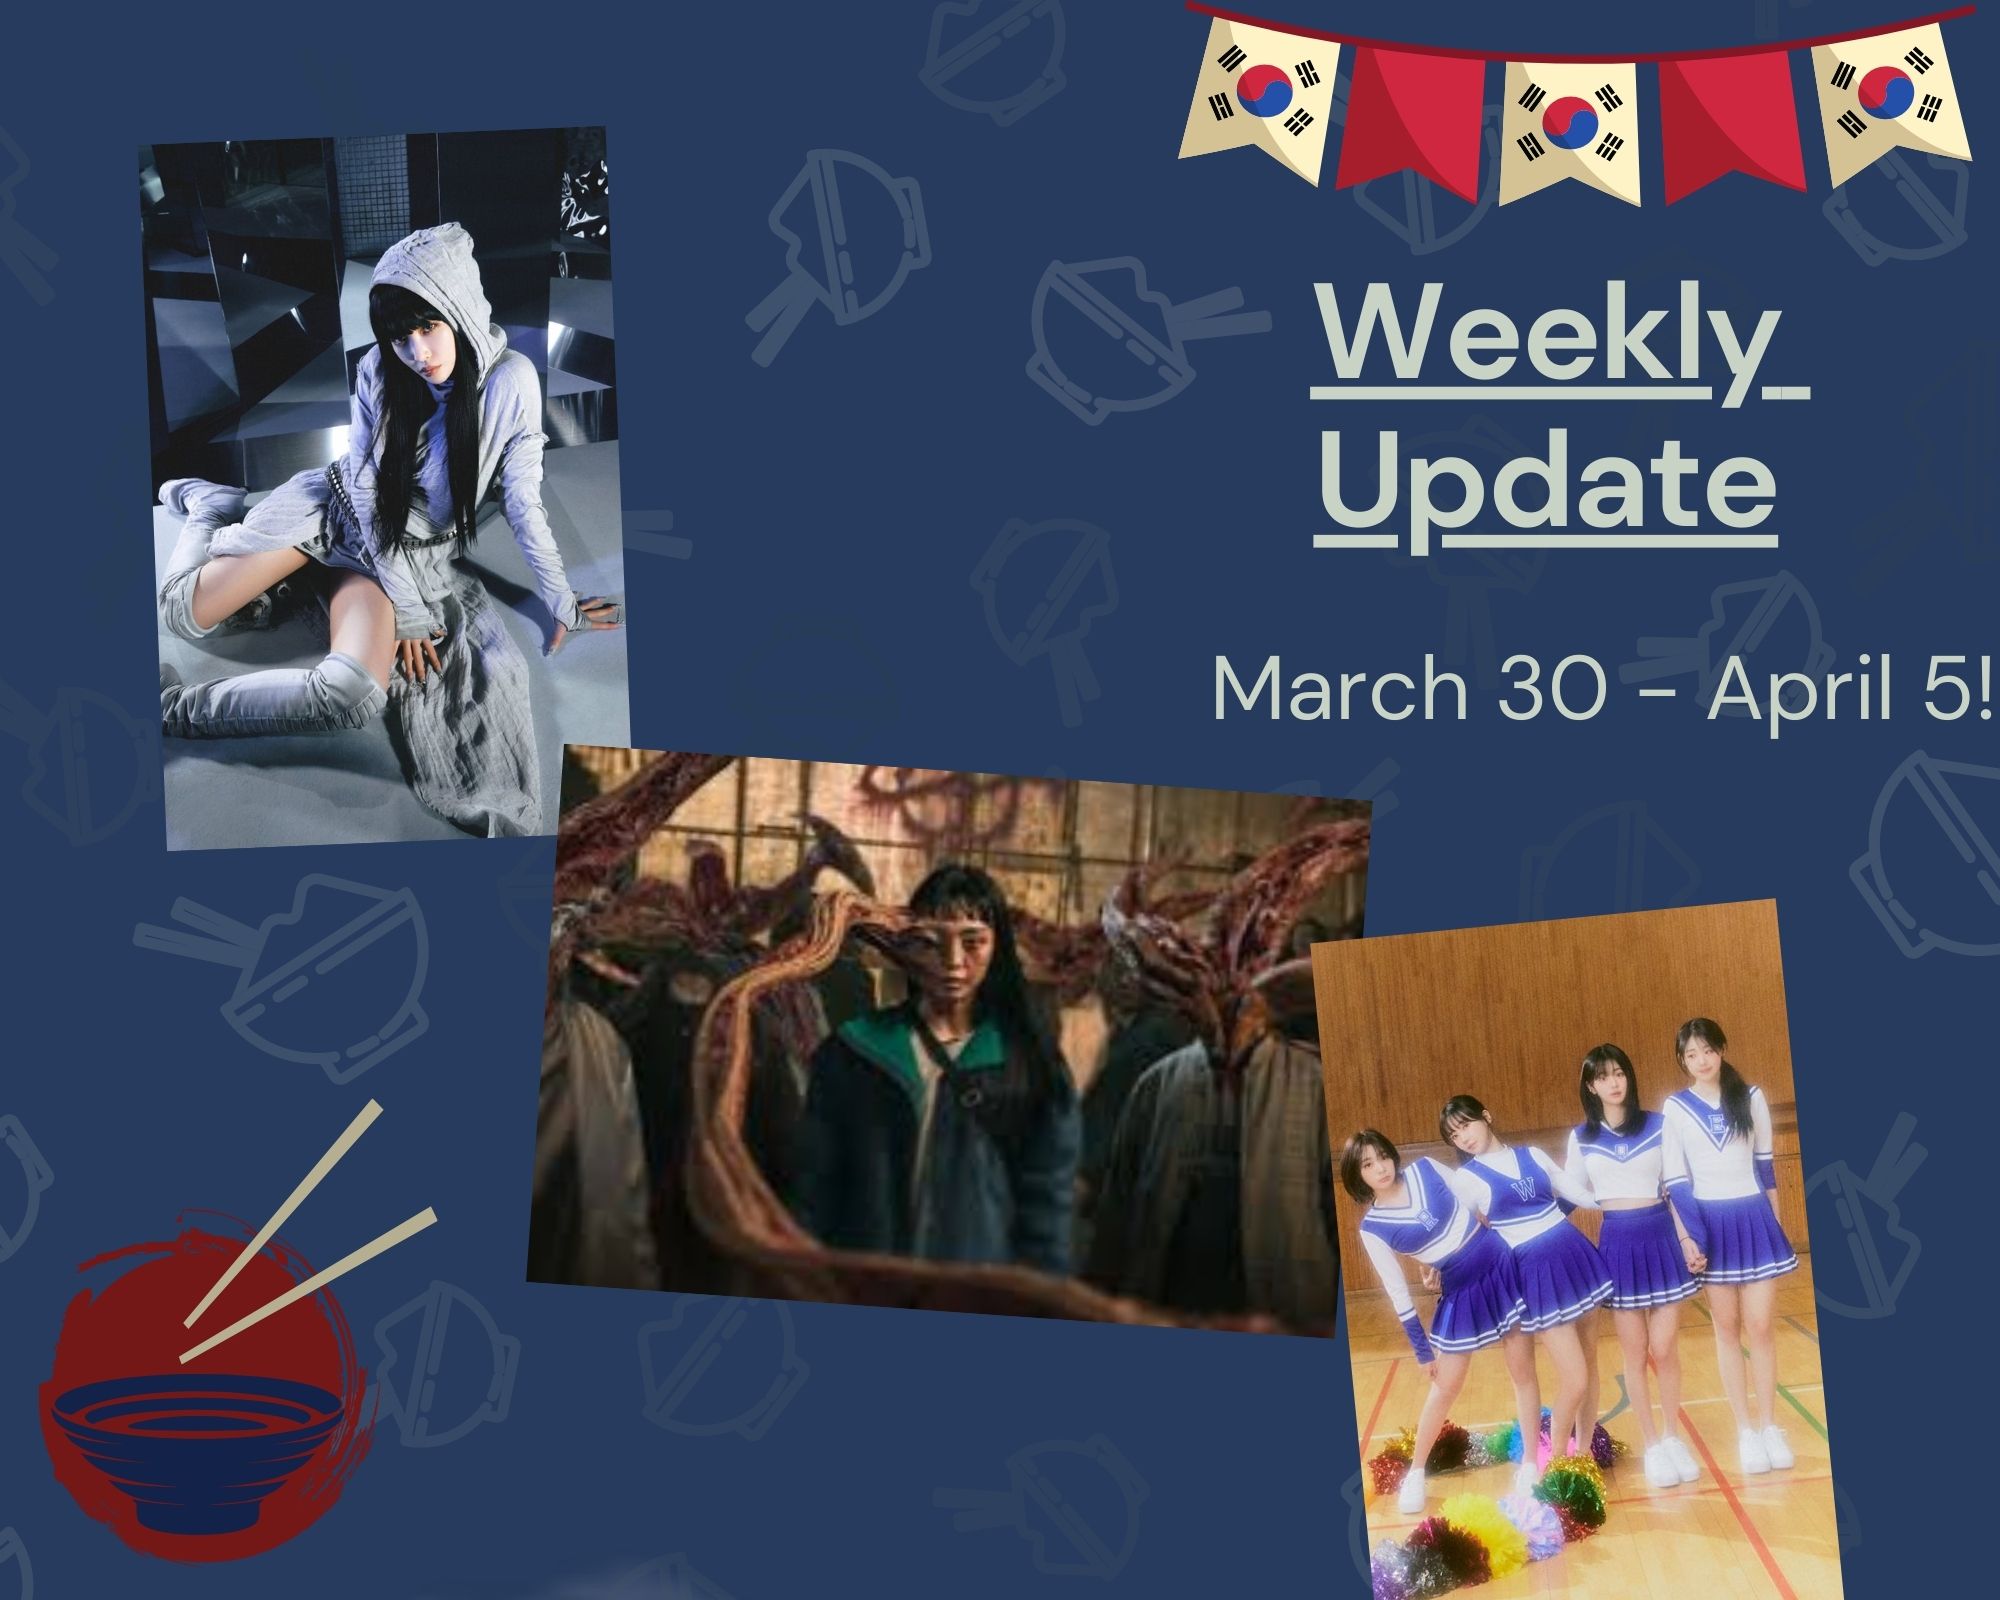 Weekly Update - March 30 - April 5